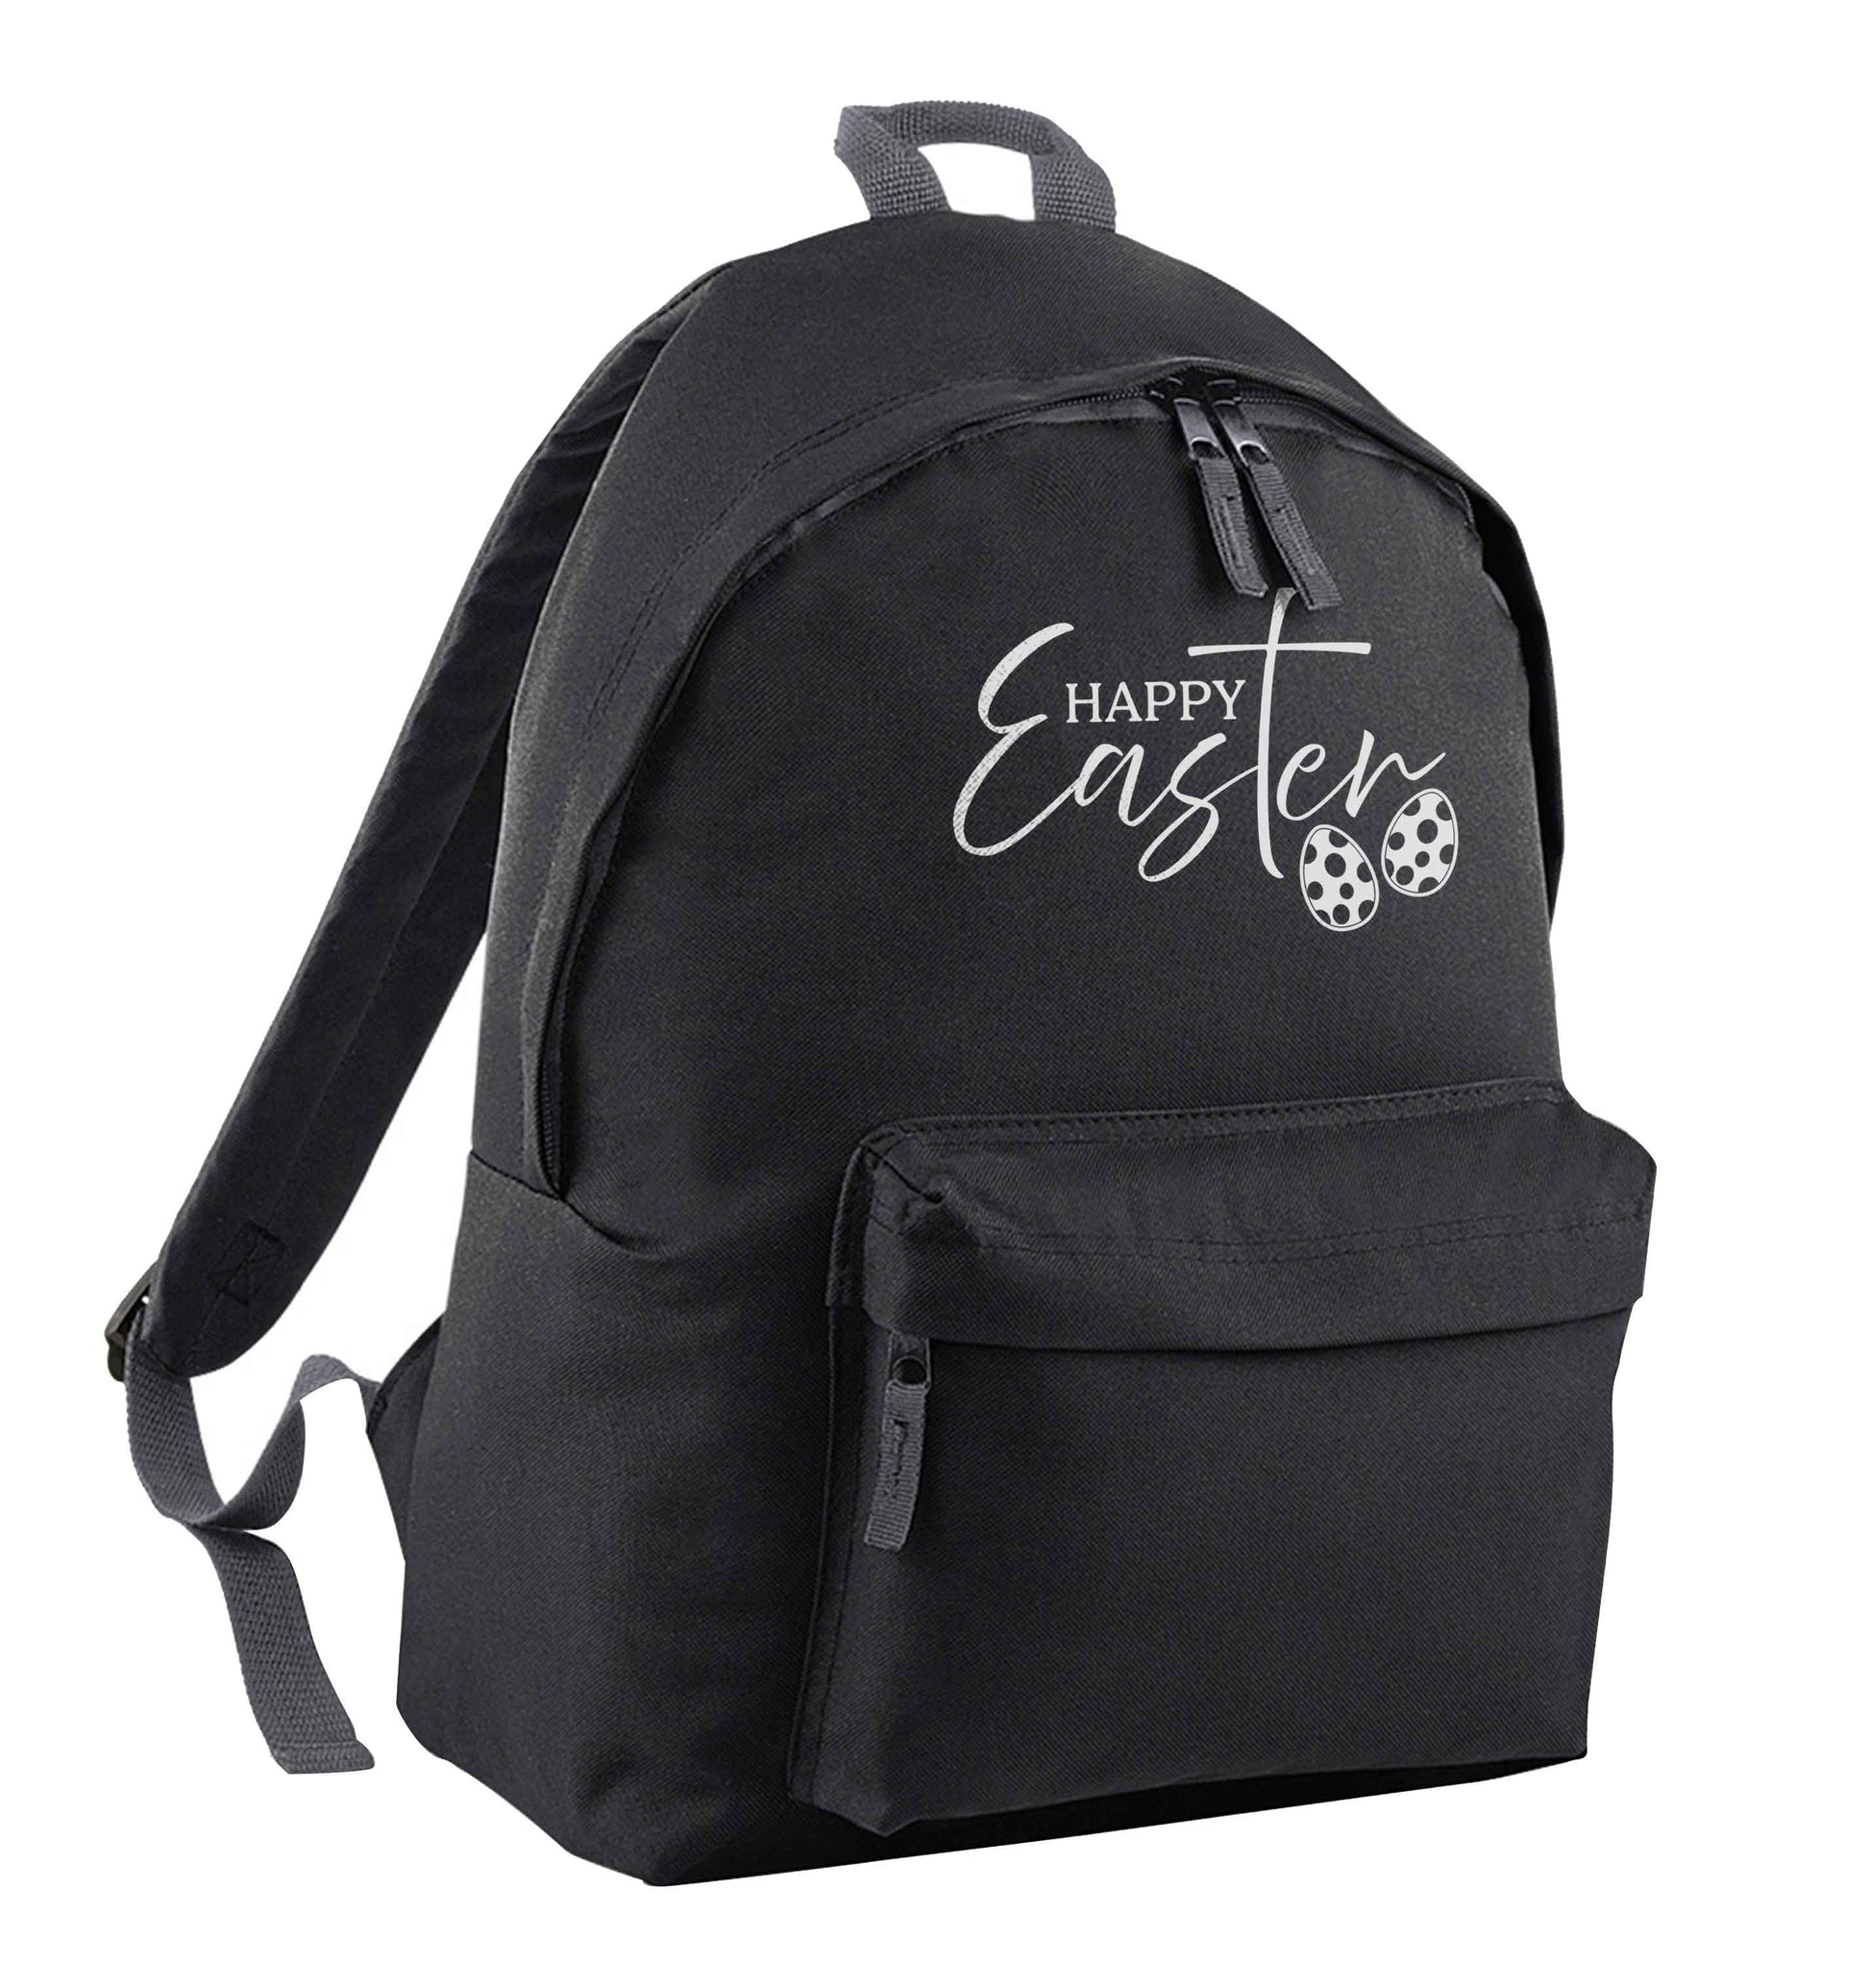 Happy Easter black adults backpack